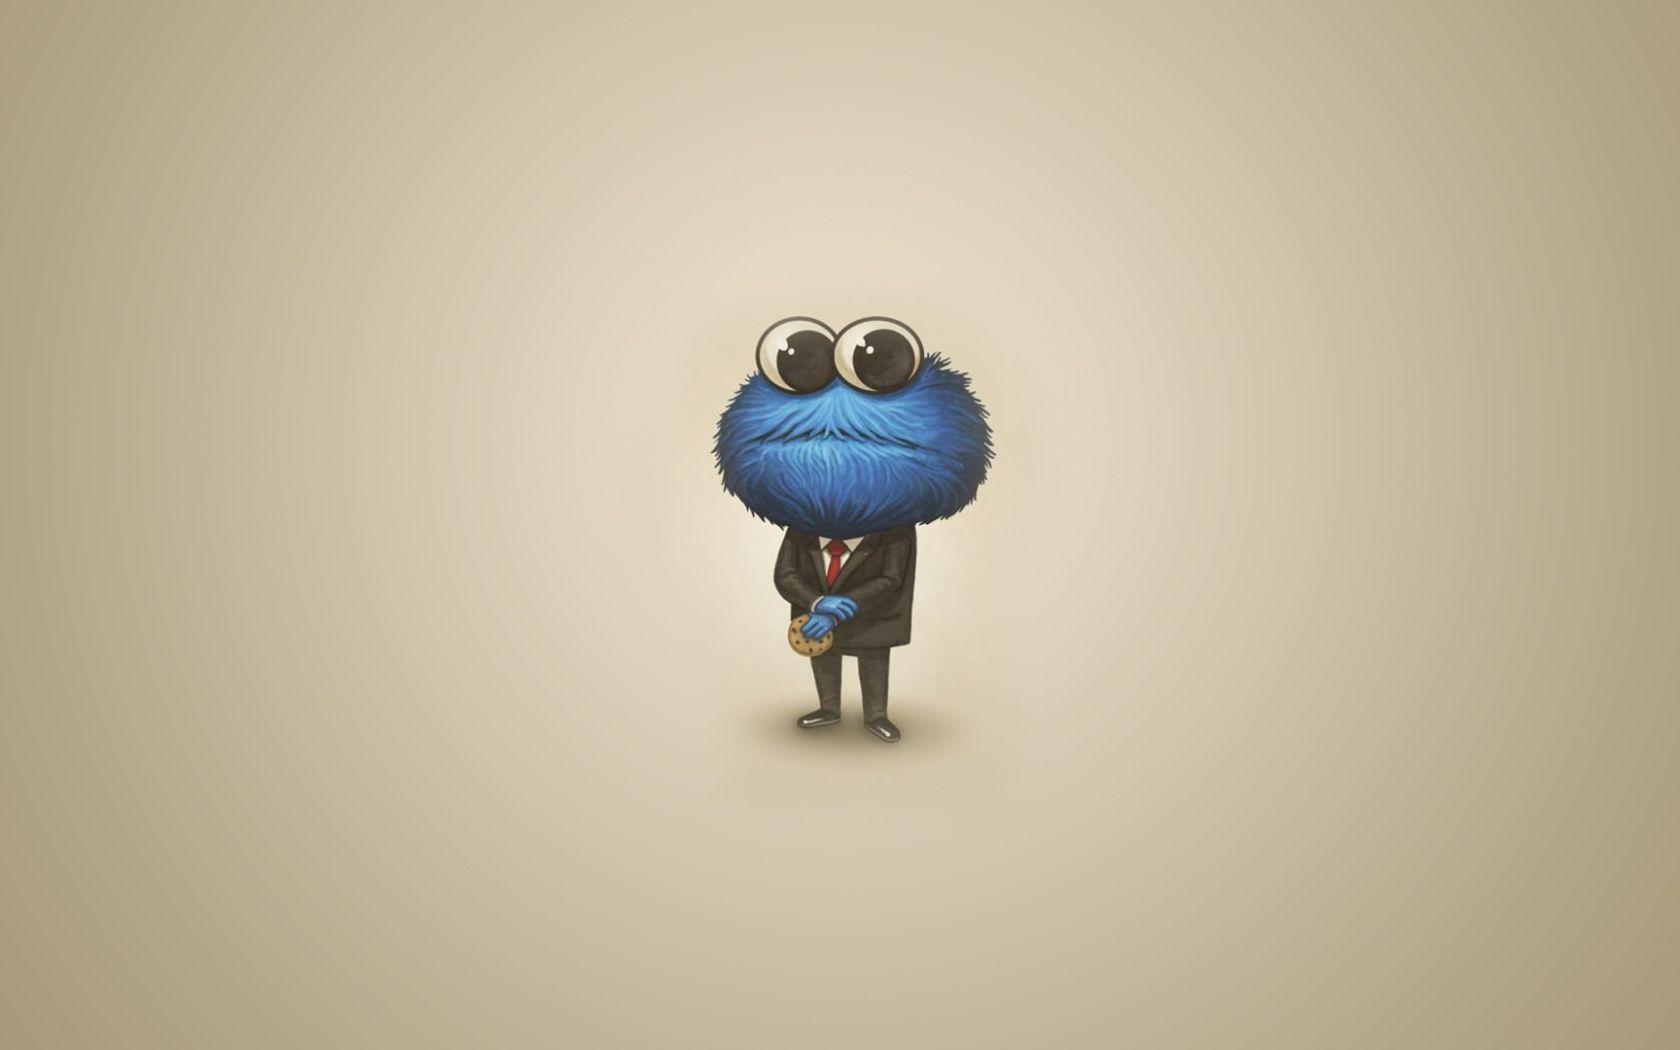 Wallpaper For > Cookie Monster And Elmo Wallpaper